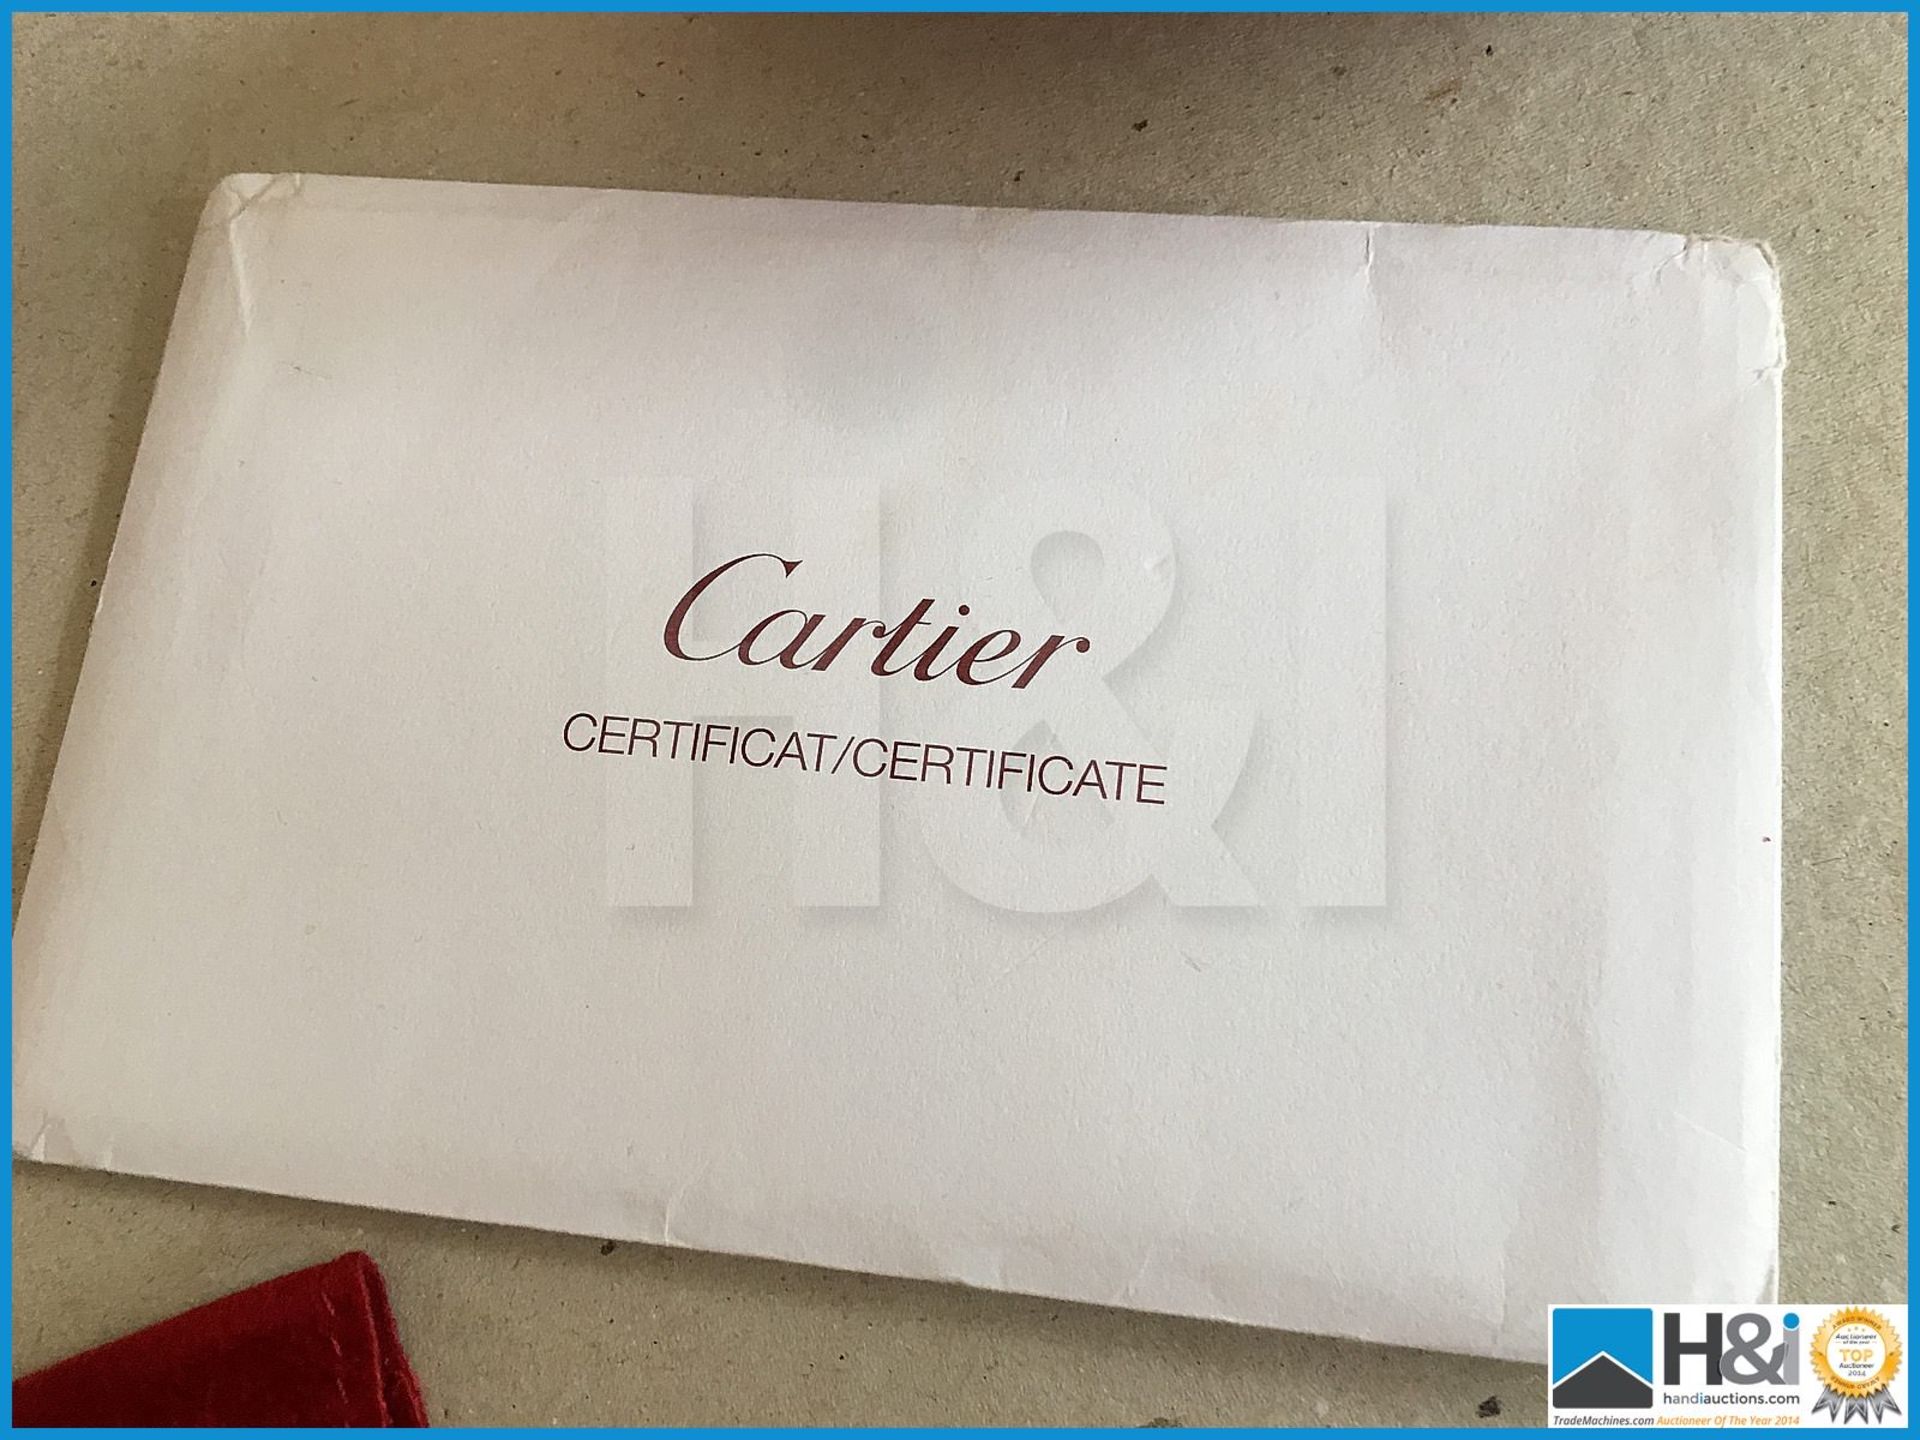 Pair of unworn genuine Cartier Diamond & Platinum earrings presented with a host of certificates, pa - Image 7 of 17